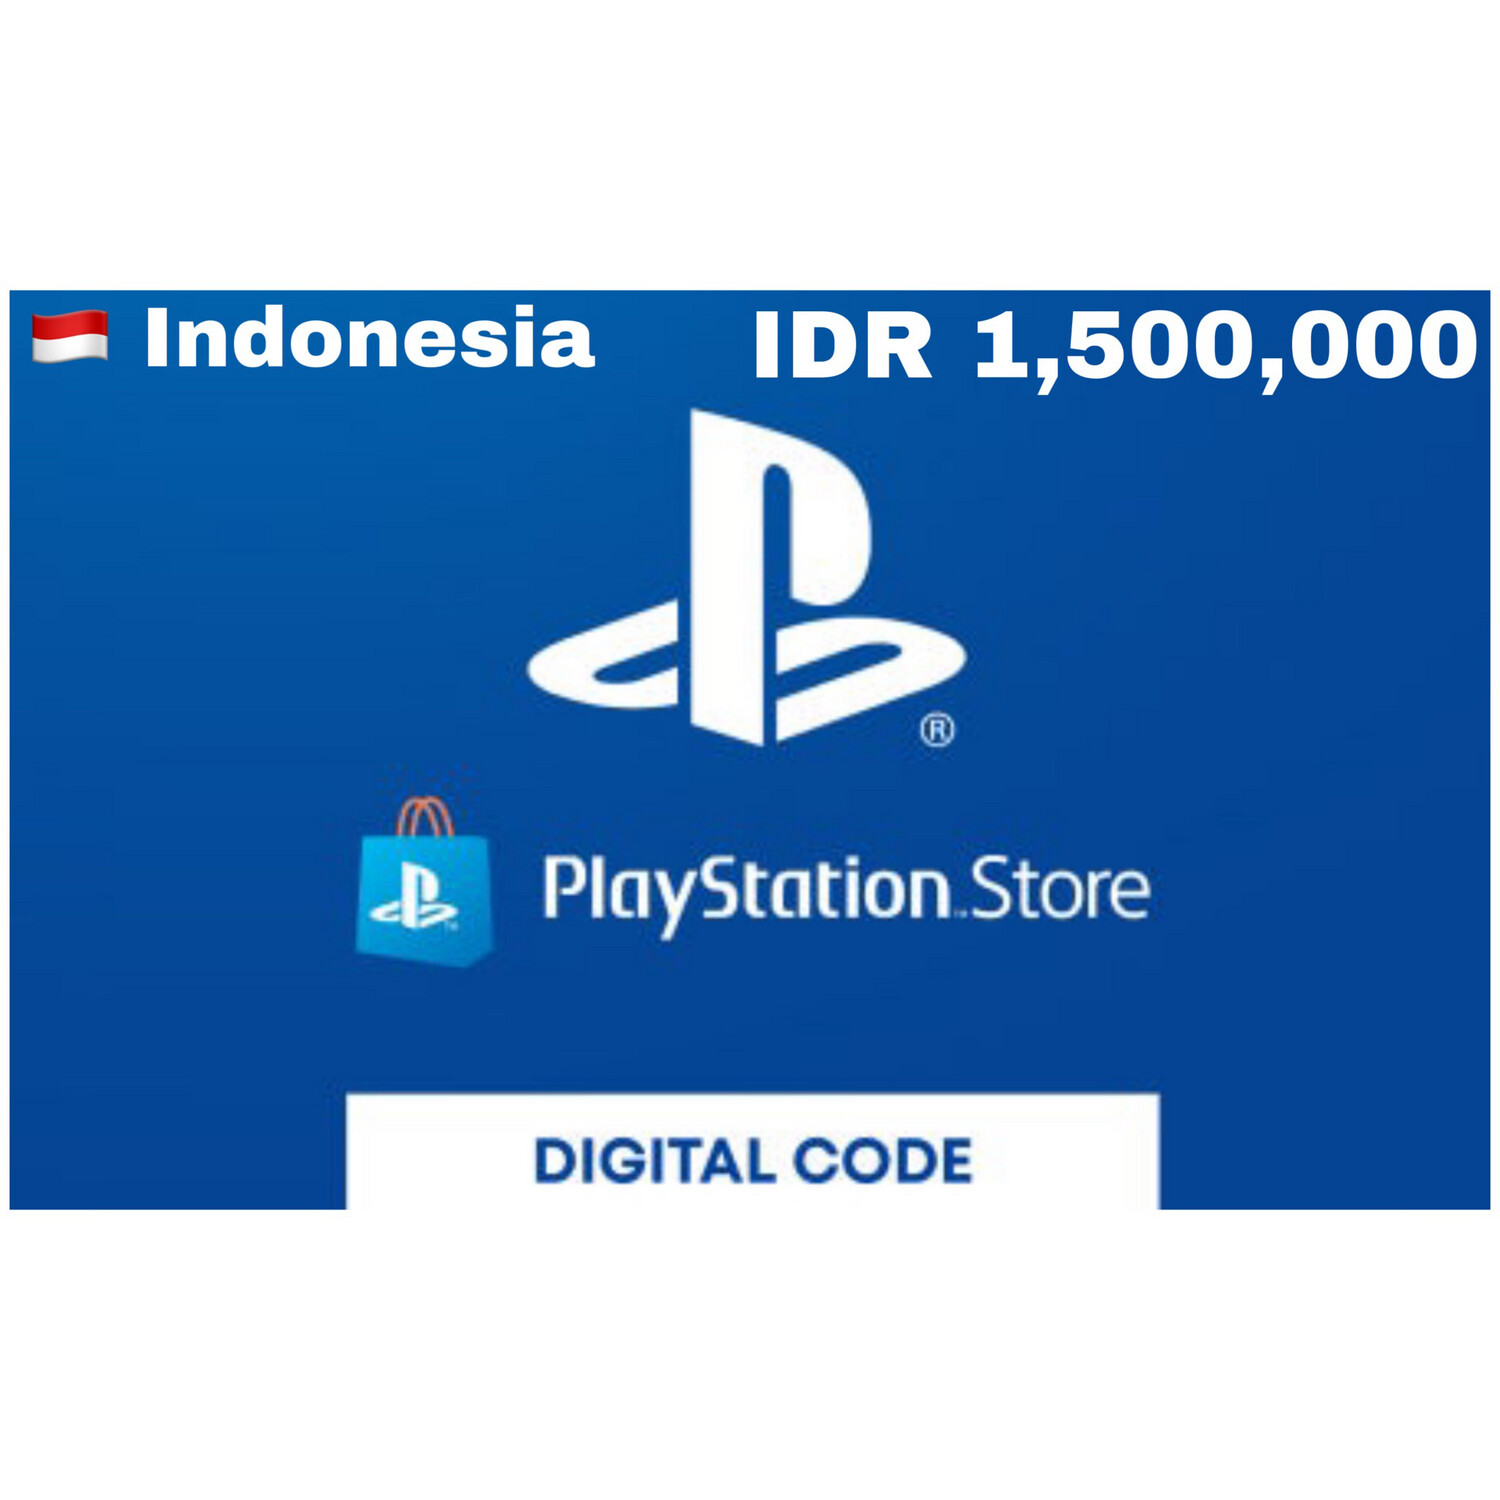 Playstation Store Gift Card Indonesia IDR 1,500,000